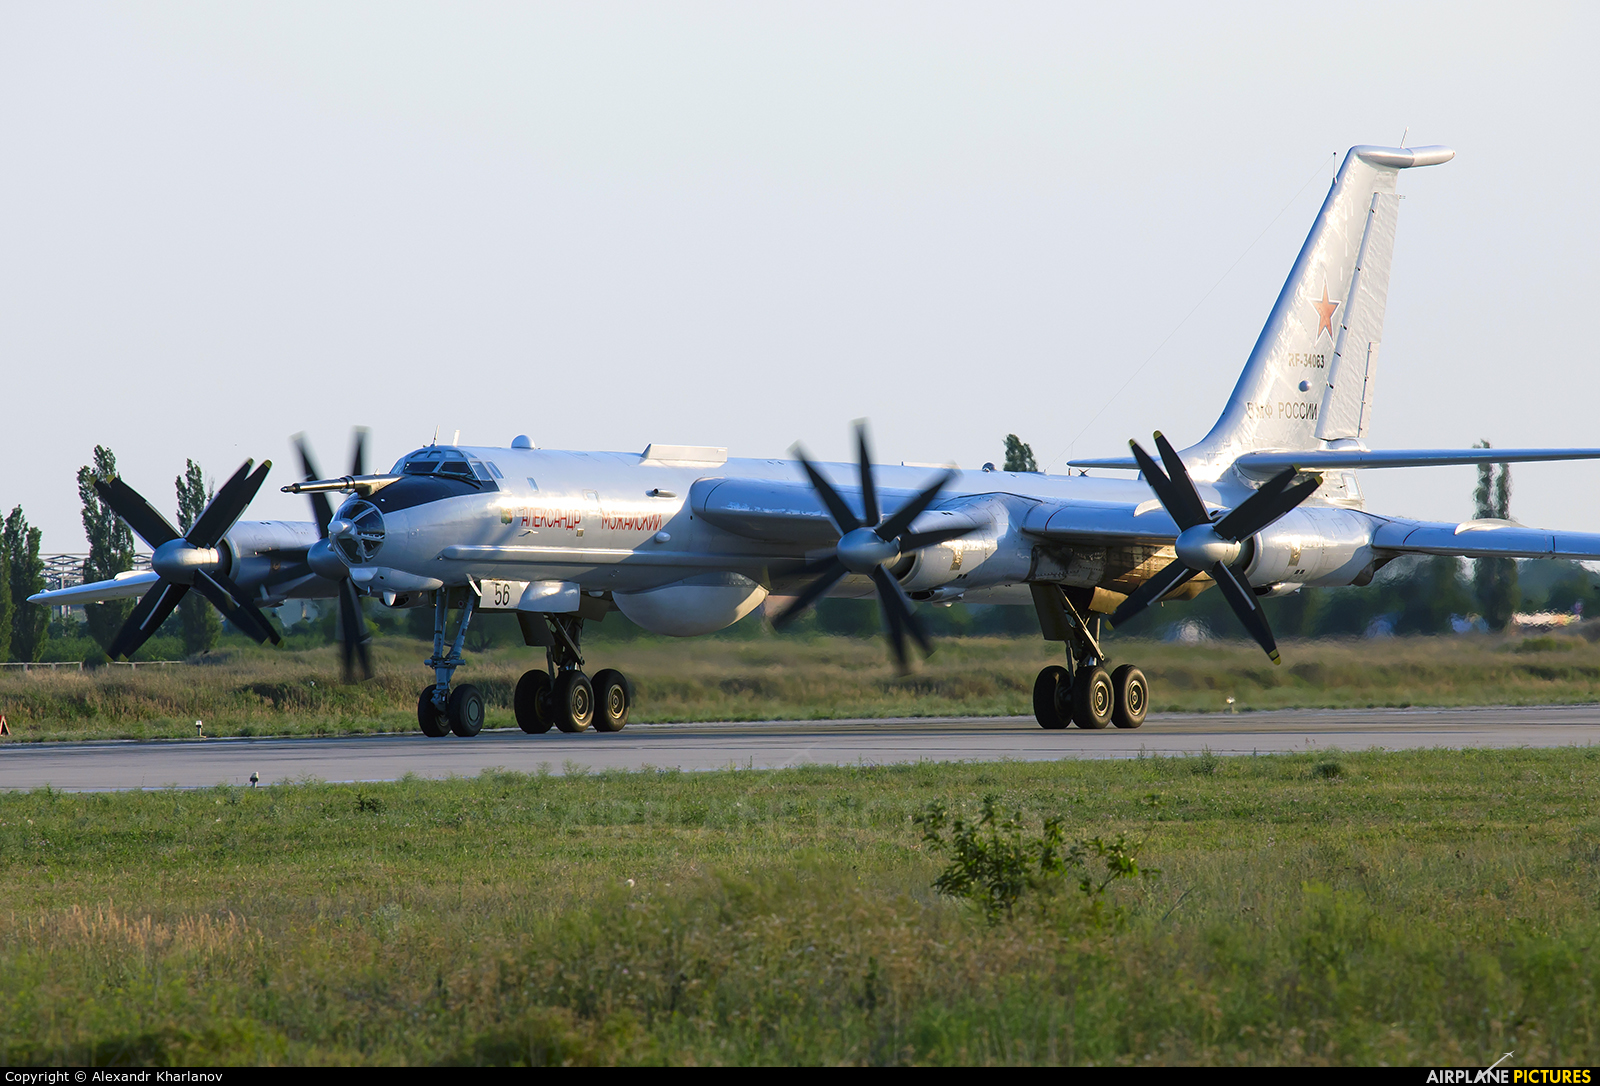 Russia - Navy 56 aircraft at Undisclosed Location